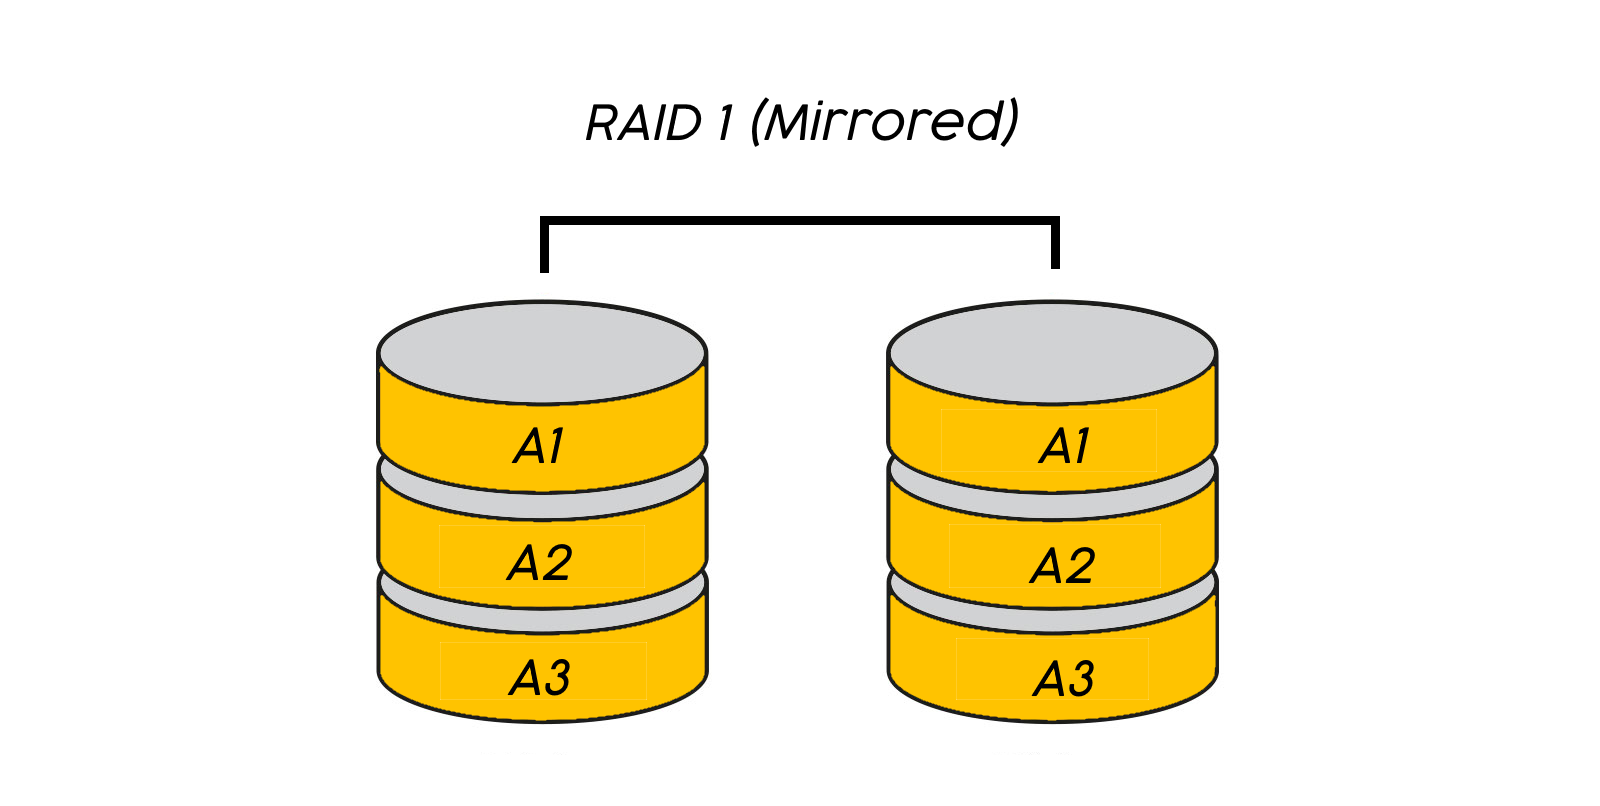 A diagram showing how RAID 1 arrays are set up